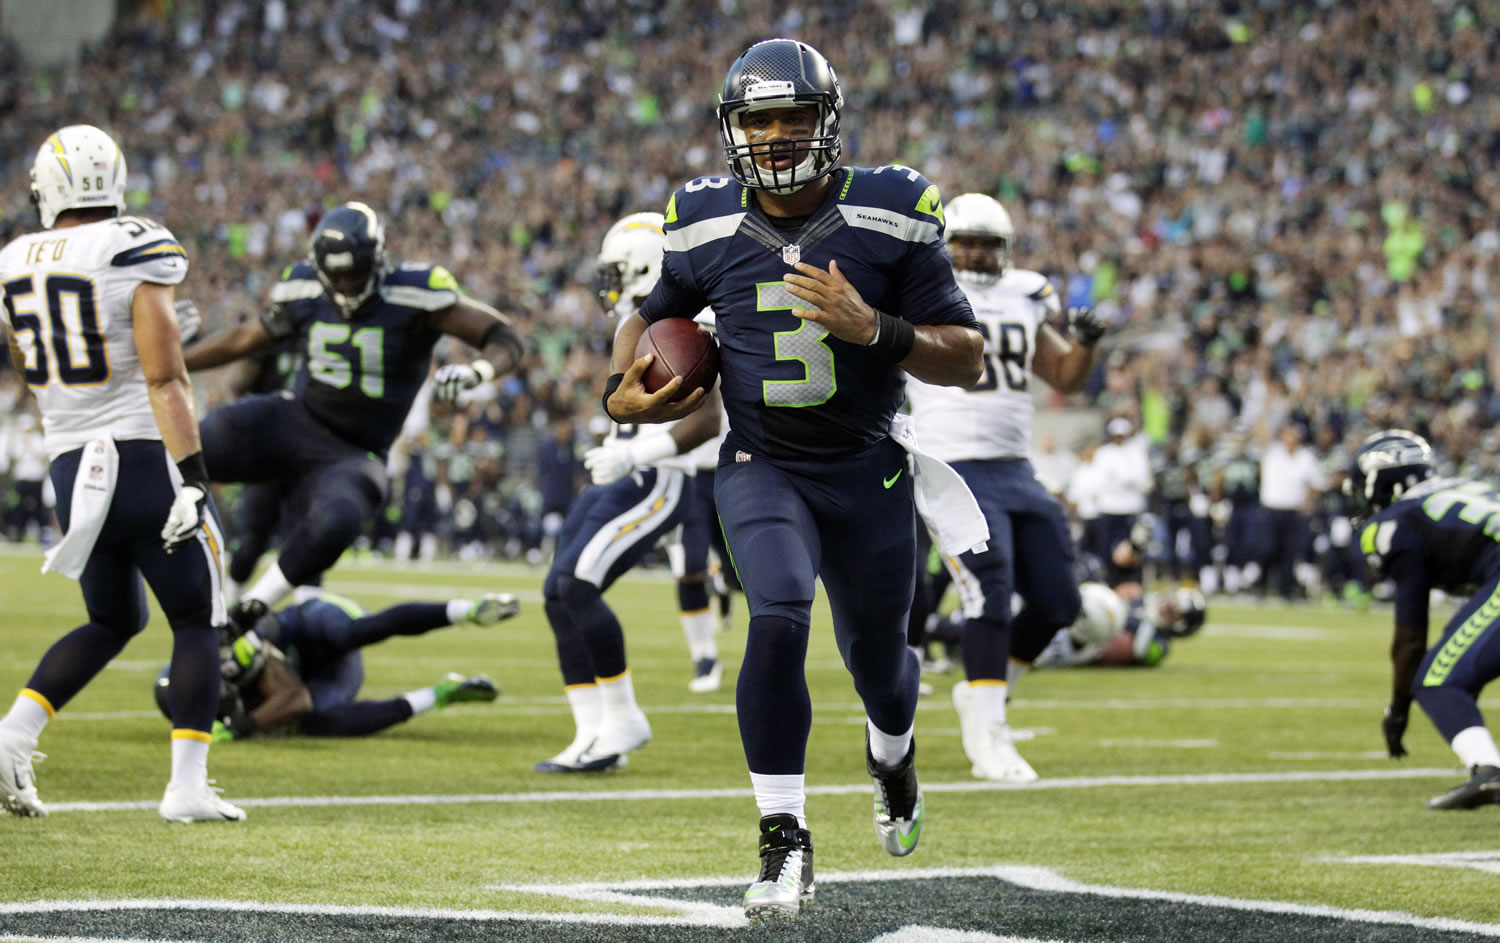 Seattle Seahawks quarterback Russell Wilson runs for a touchdown in the first half of a preseason NFL game against the San Diego Chargers, Friday, Aug. 15, 2014, in Seattle. It was Wilson's second rushing touchdown in the first half.